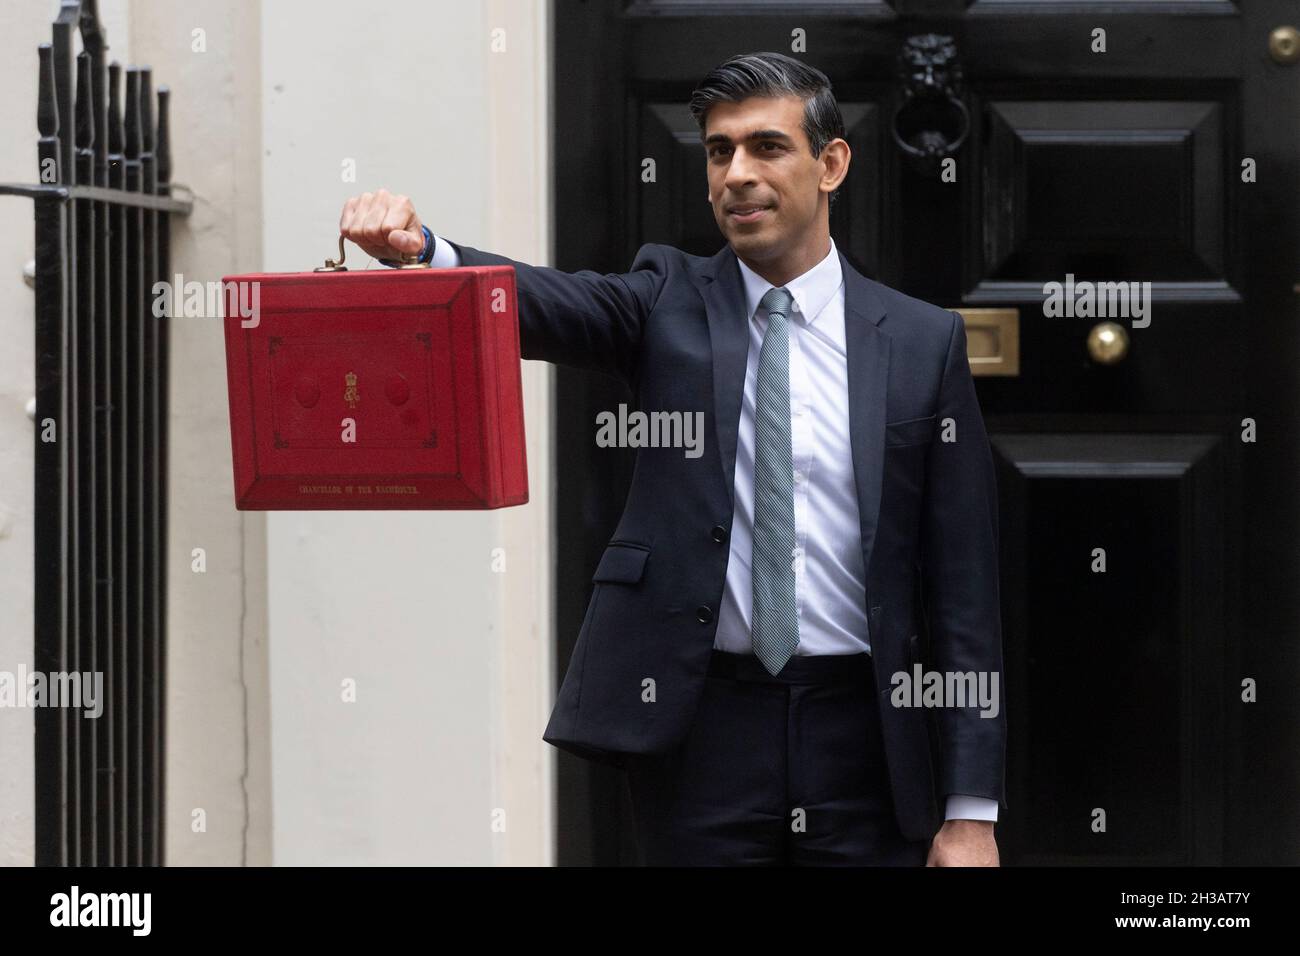 27/10/2021. London, UK. The Chancellor of the Exchequer Rishi Sunak holds the red dispatch box for the media before leaving No.11 Downing Street to present The Budget at The House of Commons. Stock Photo